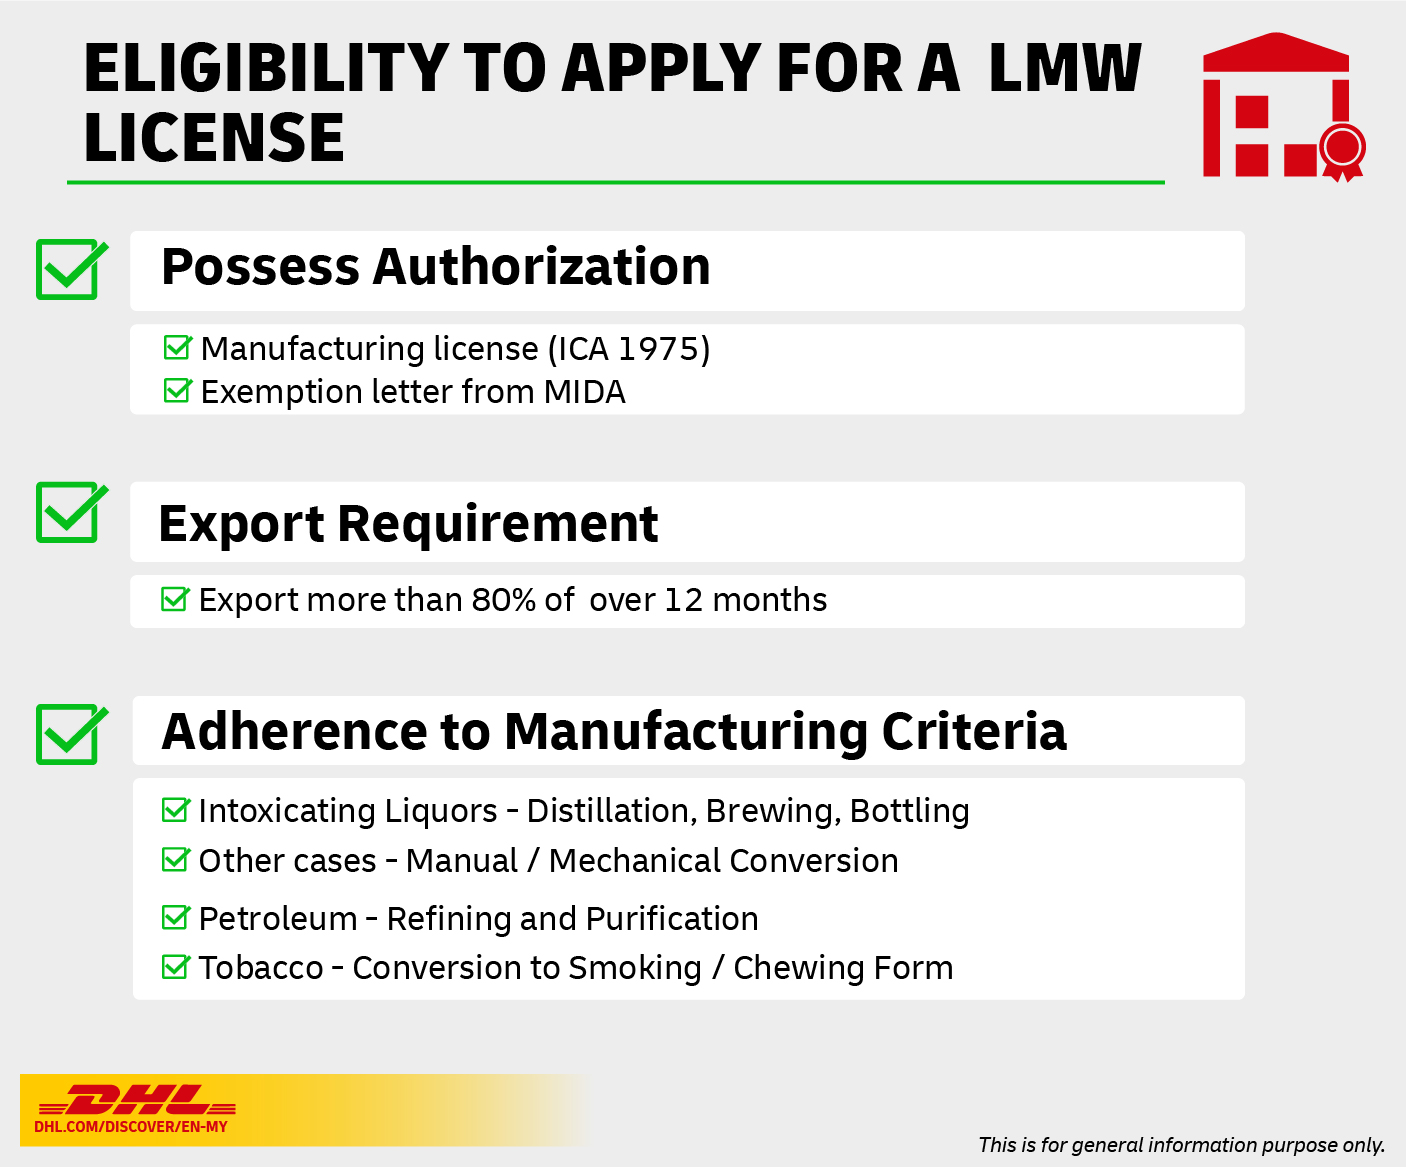 Criteria in three key areas: manufacturing license, production export quota, and manufacturing criteria LMW license applicants must meet